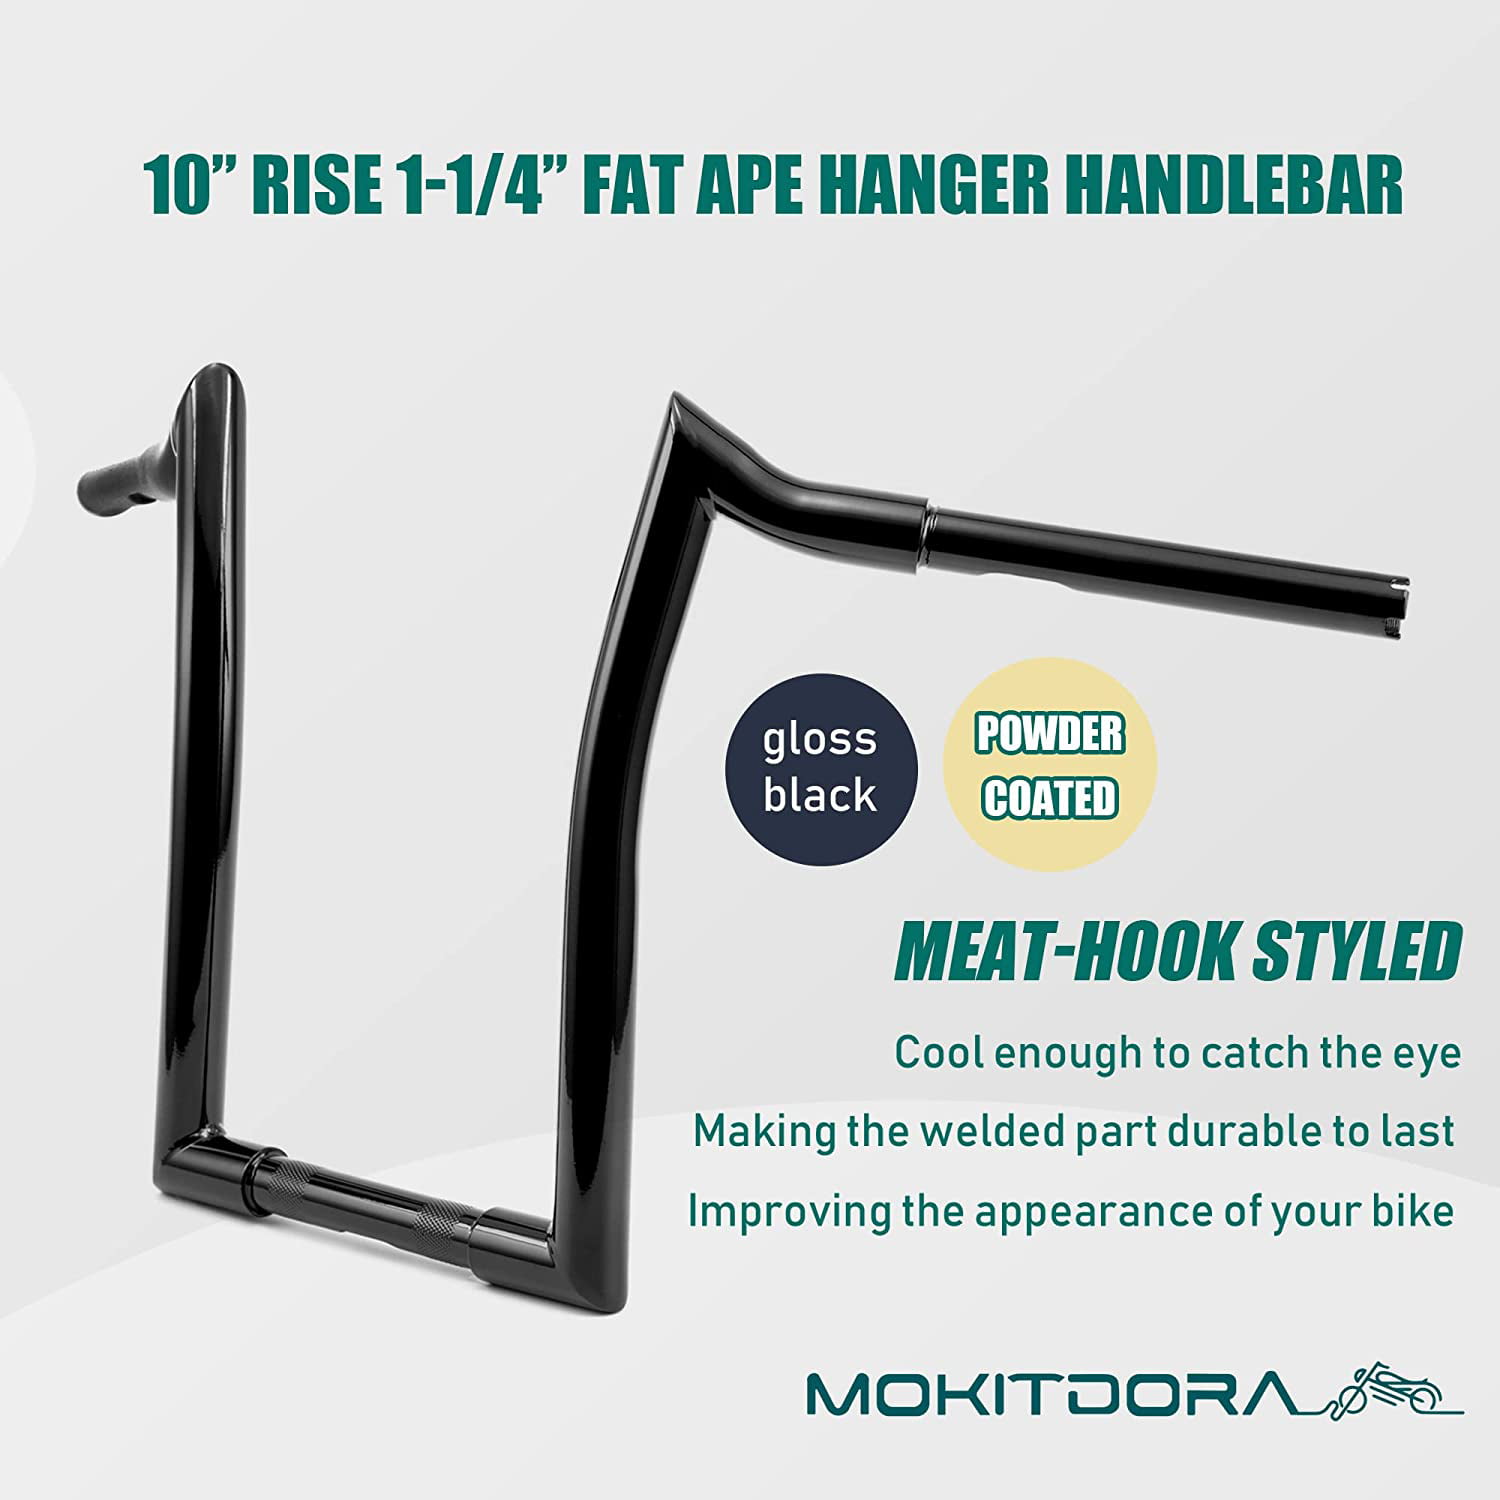 MoKitDora 10” Rise 1-1/4” Fat 1 Clamp Ape Hanger Bar Handlebar Compatible  with 1998-2013 Road Glide 1994-up Road King Harley Sportster Dyna Softail  Touring, Black 